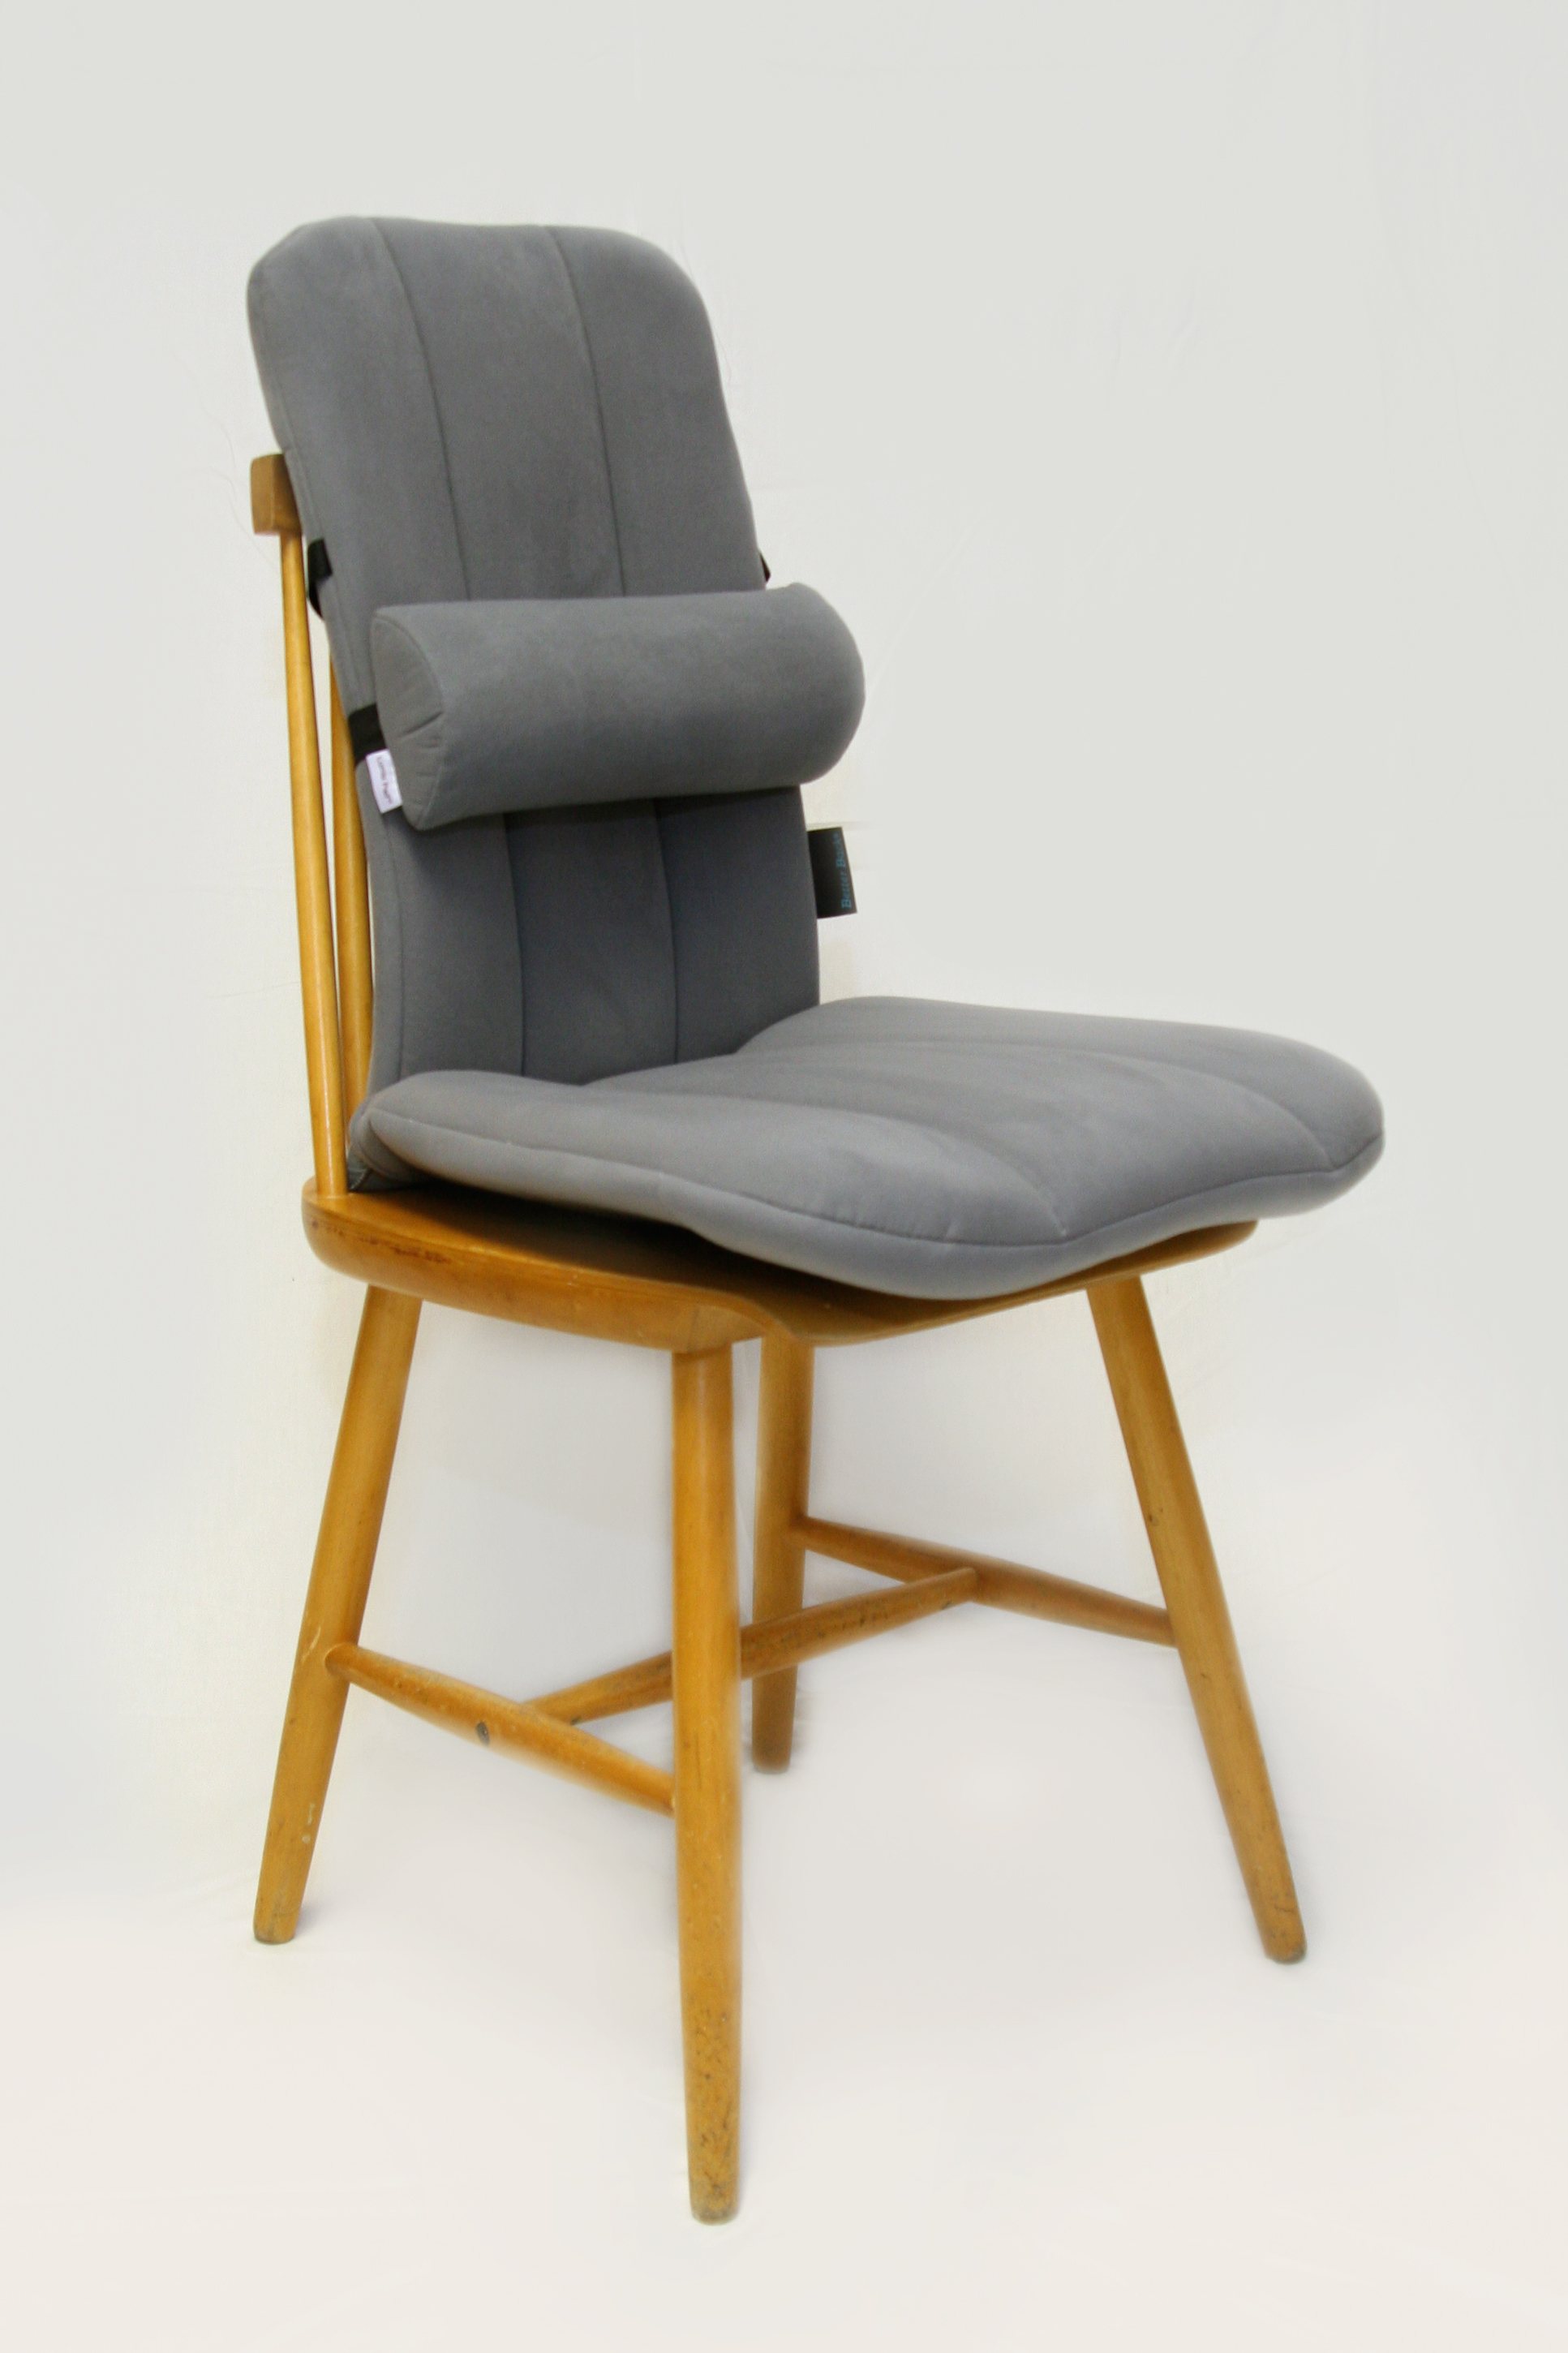 https://jobri.com/wp-content/uploads/2015/02/BB-Deluxe-Back-System-in-Wood-Chair.jpg